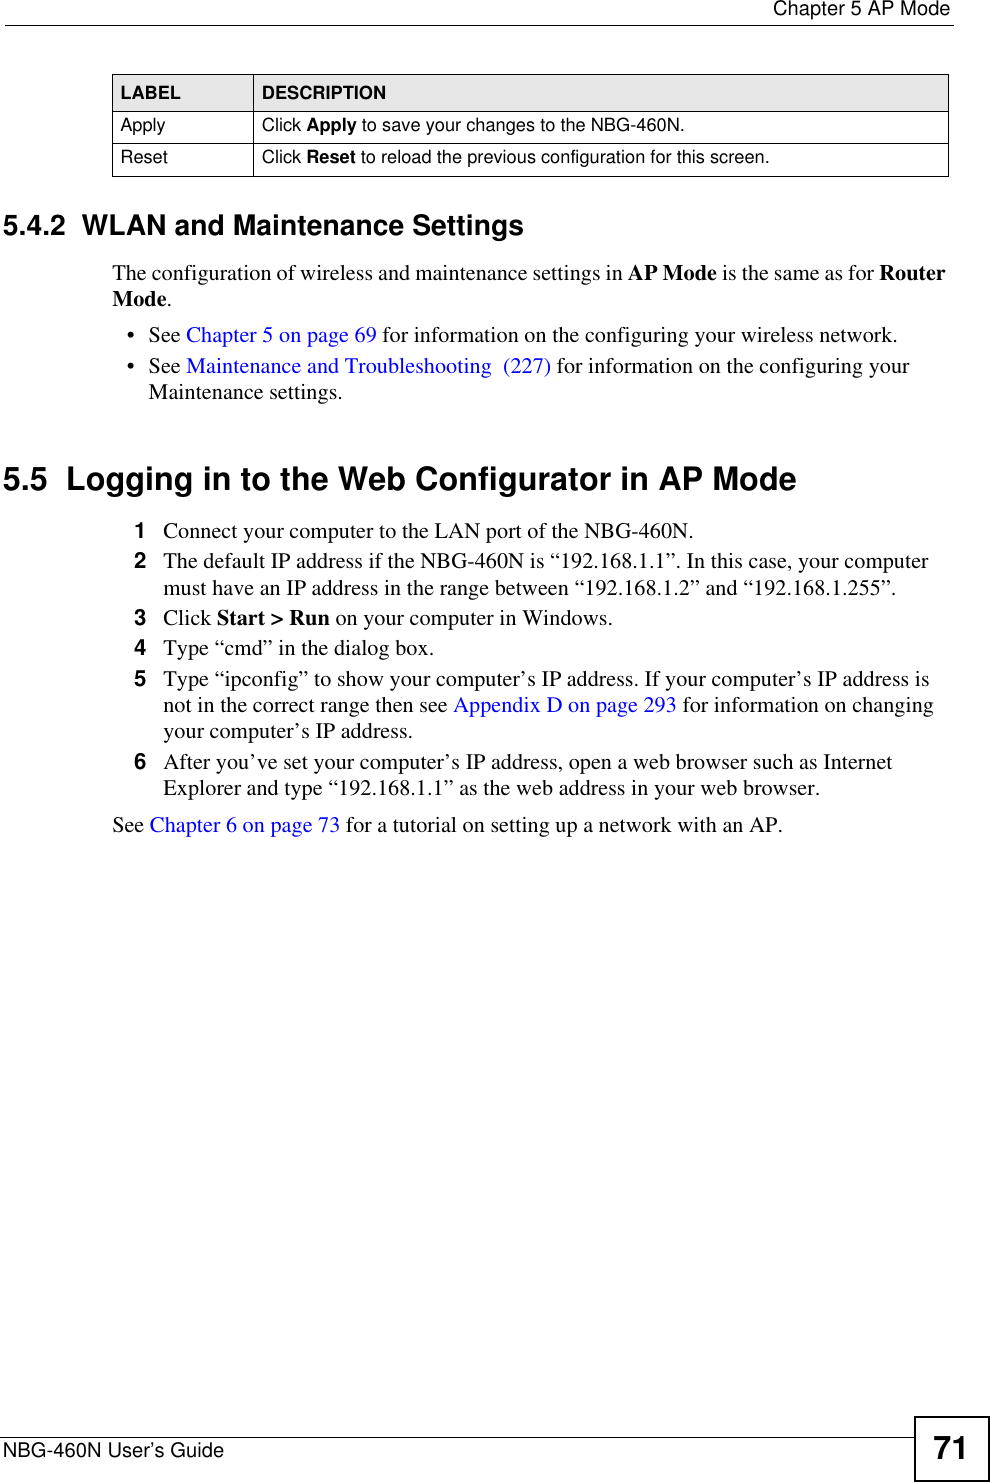  Chapter 5 AP ModeNBG-460N User’s Guide 715.4.2  WLAN and Maintenance SettingsThe configuration of wireless and maintenance settings in AP Mode is the same as for RouterMode.• See Chapter 5 on page 69 for information on the configuring your wireless network.• See Maintenance and Troubleshooting  (227) for information on the configuring your Maintenance settings. 5.5  Logging in to the Web Configurator in AP Mode1Connect your computer to the LAN port of the NBG-460N. 2The default IP address if the NBG-460N is “192.168.1.1”. In this case, your computer must have an IP address in the range between “192.168.1.2” and “192.168.1.255”.3Click Start &gt; Run on your computer in Windows. 4Type “cmd” in the dialog box.5Type “ipconfig” to show your computer’s IP address. If your computer’s IP address is not in the correct range then see Appendix D on page 293 for information on changing your computer’s IP address.6After you’ve set your computer’s IP address, open a web browser such as Internet Explorer and type “192.168.1.1” as the web address in your web browser.See Chapter 6 on page 73 for a tutorial on setting up a network with an AP.Apply Click Apply to save your changes to the NBG-460N.Reset Click Reset to reload the previous configuration for this screen.LABEL DESCRIPTION